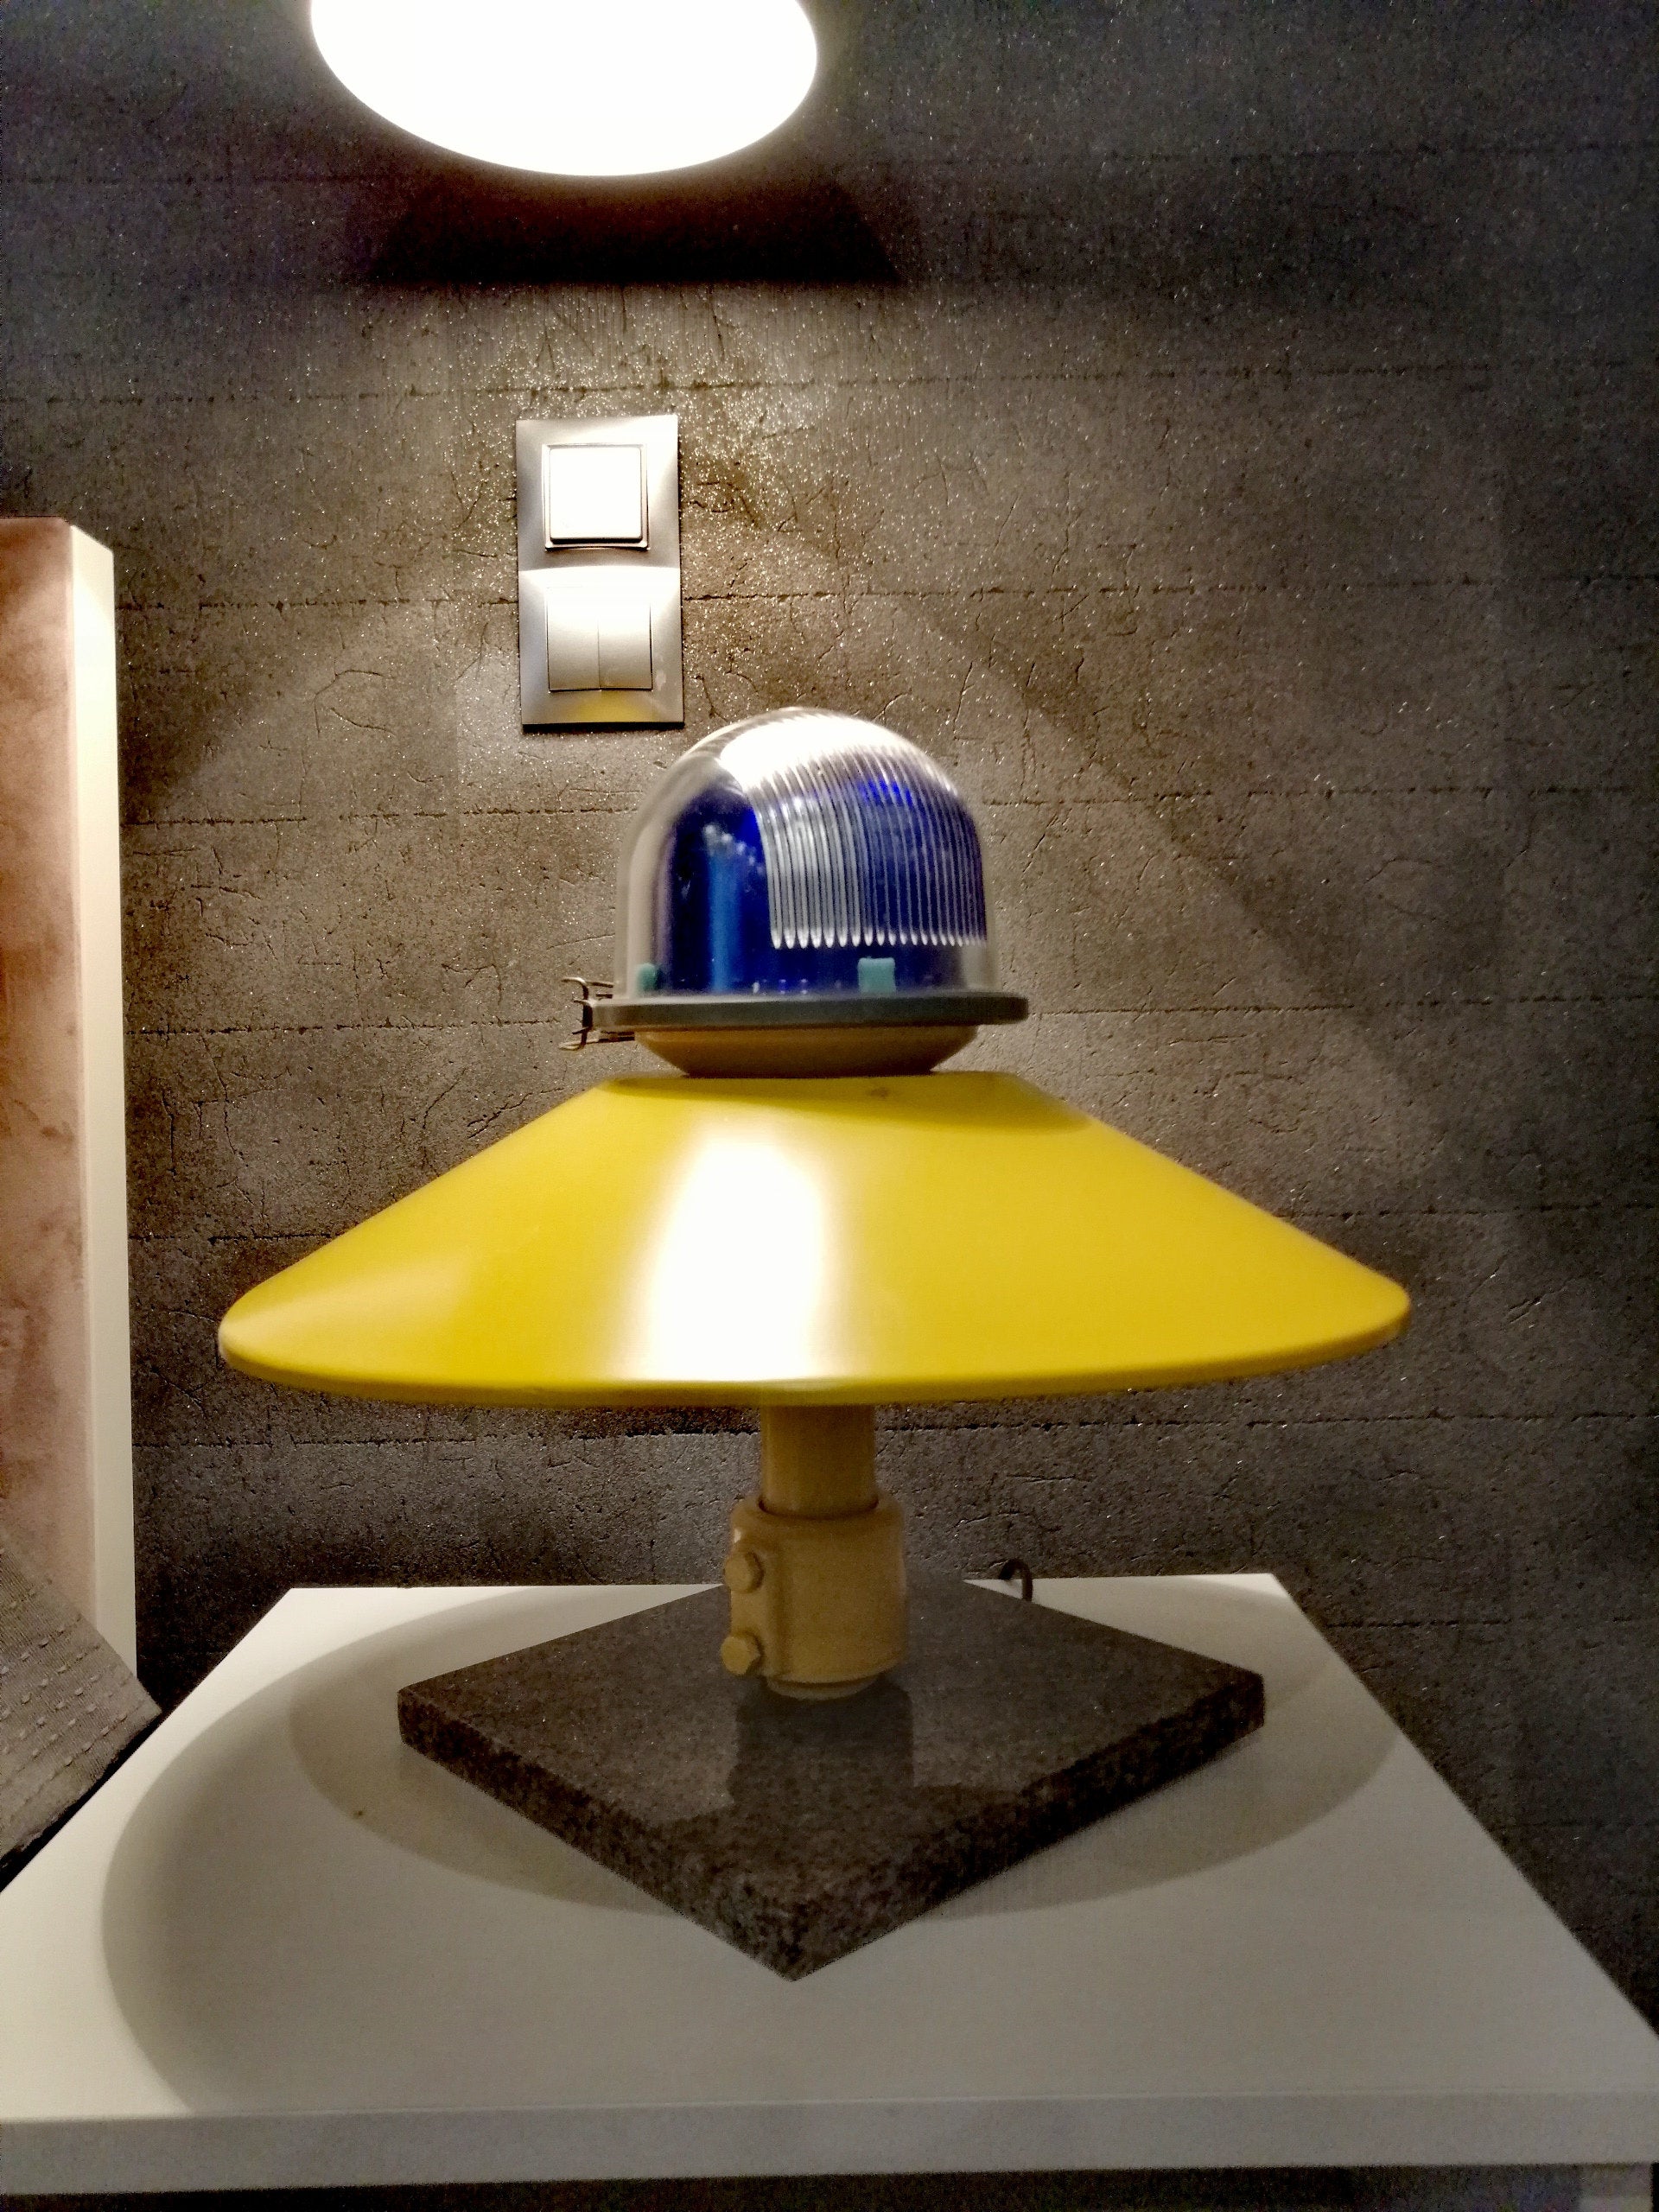 Vintage Airport Lamp | Taxiway Lamp by Tesla, Czechoslovakia, Restored - Industrial Aviation Design